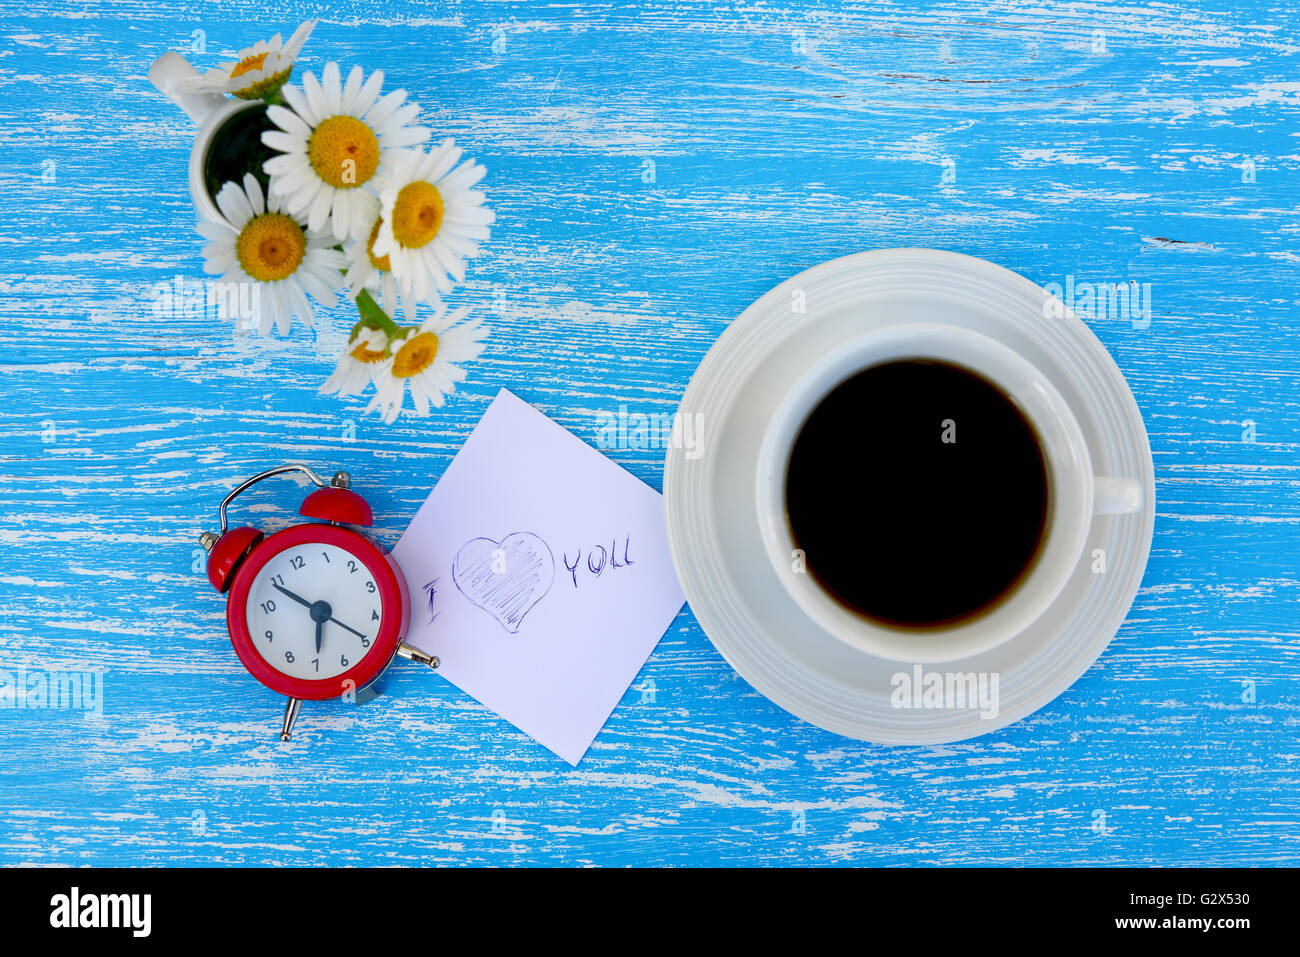 https://c8.alamy.com/comp/G2X530/daisy-flowers-alarm-clock-and-cup-of-coffee-with-i-love-you-note-on-G2X530.jpg